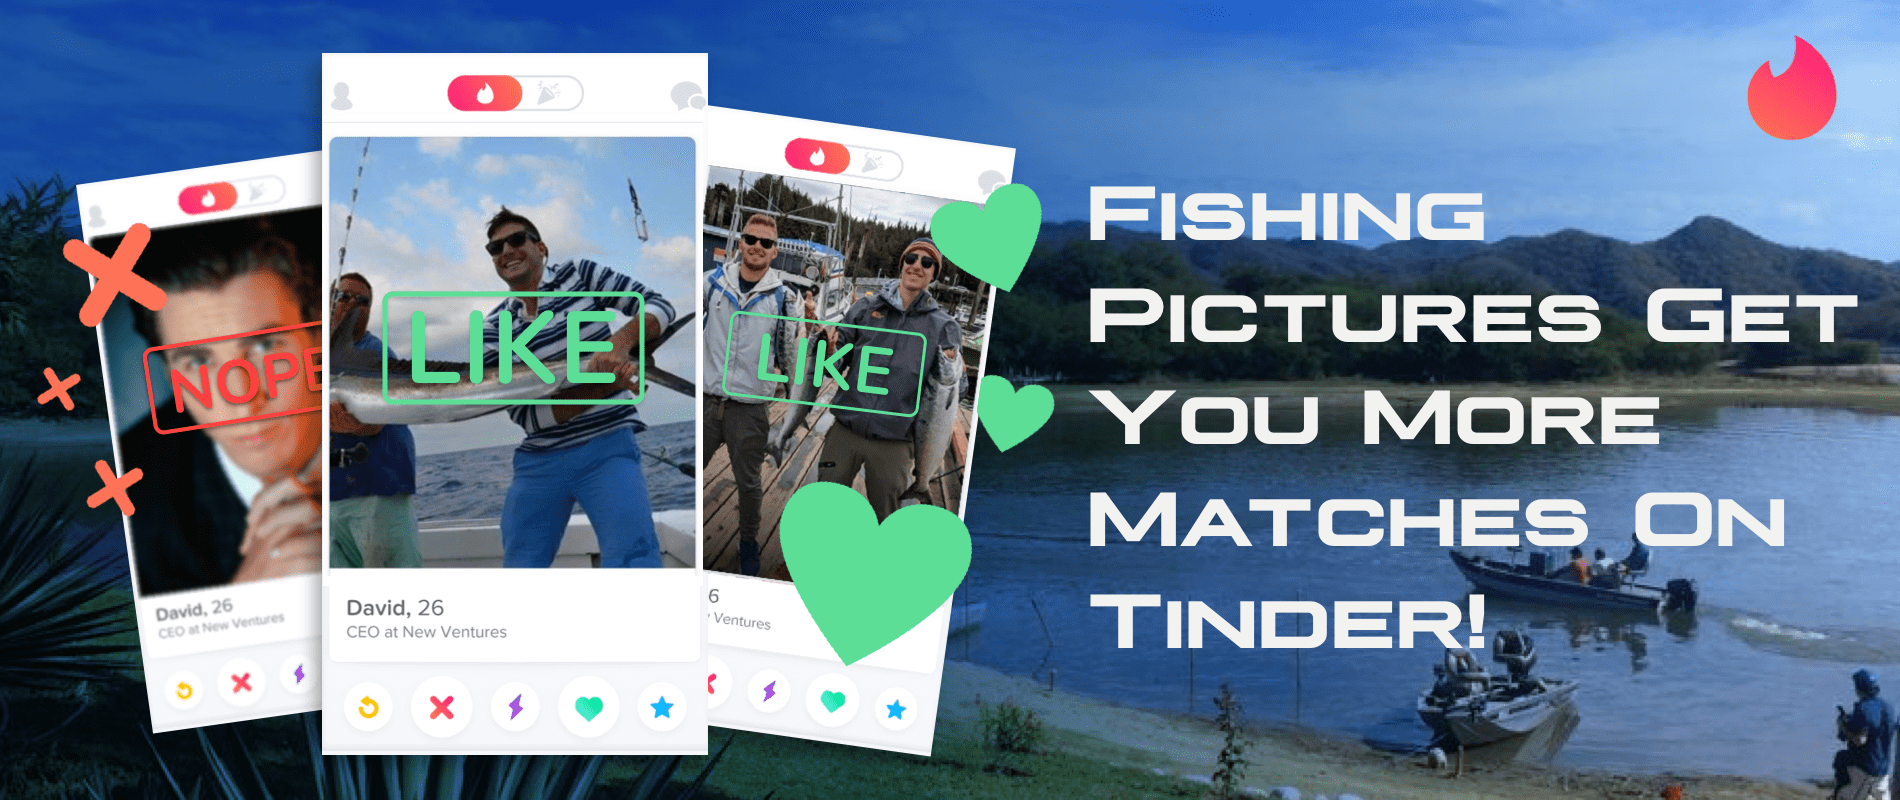 Fishing Pictures Get You More Matches On Tinder